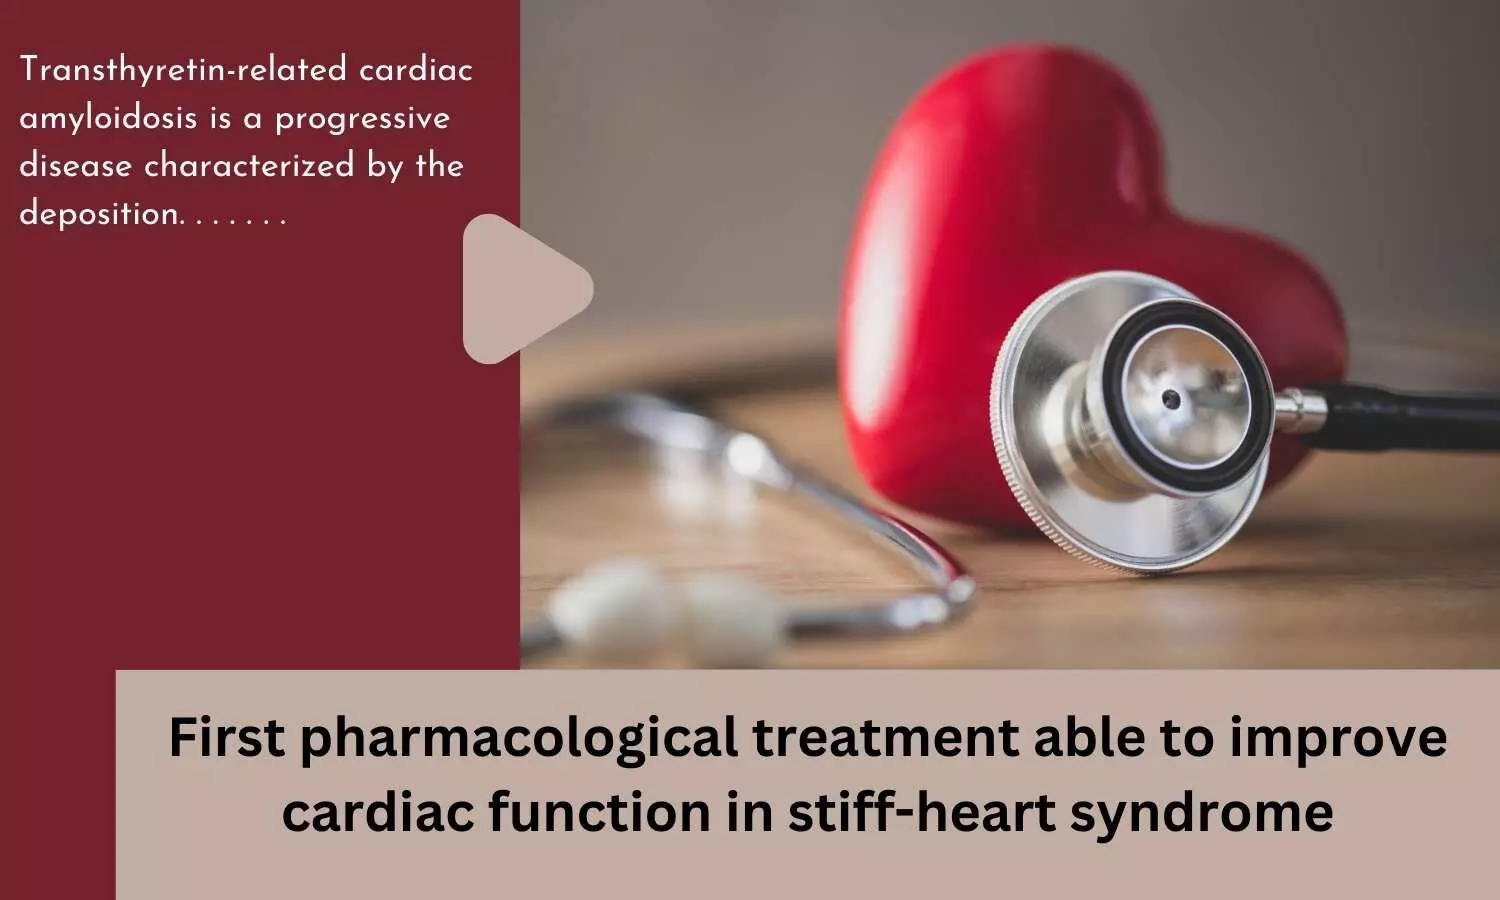 First pharmacological treatment able to improve cardiac function in stiff-heart syndrome